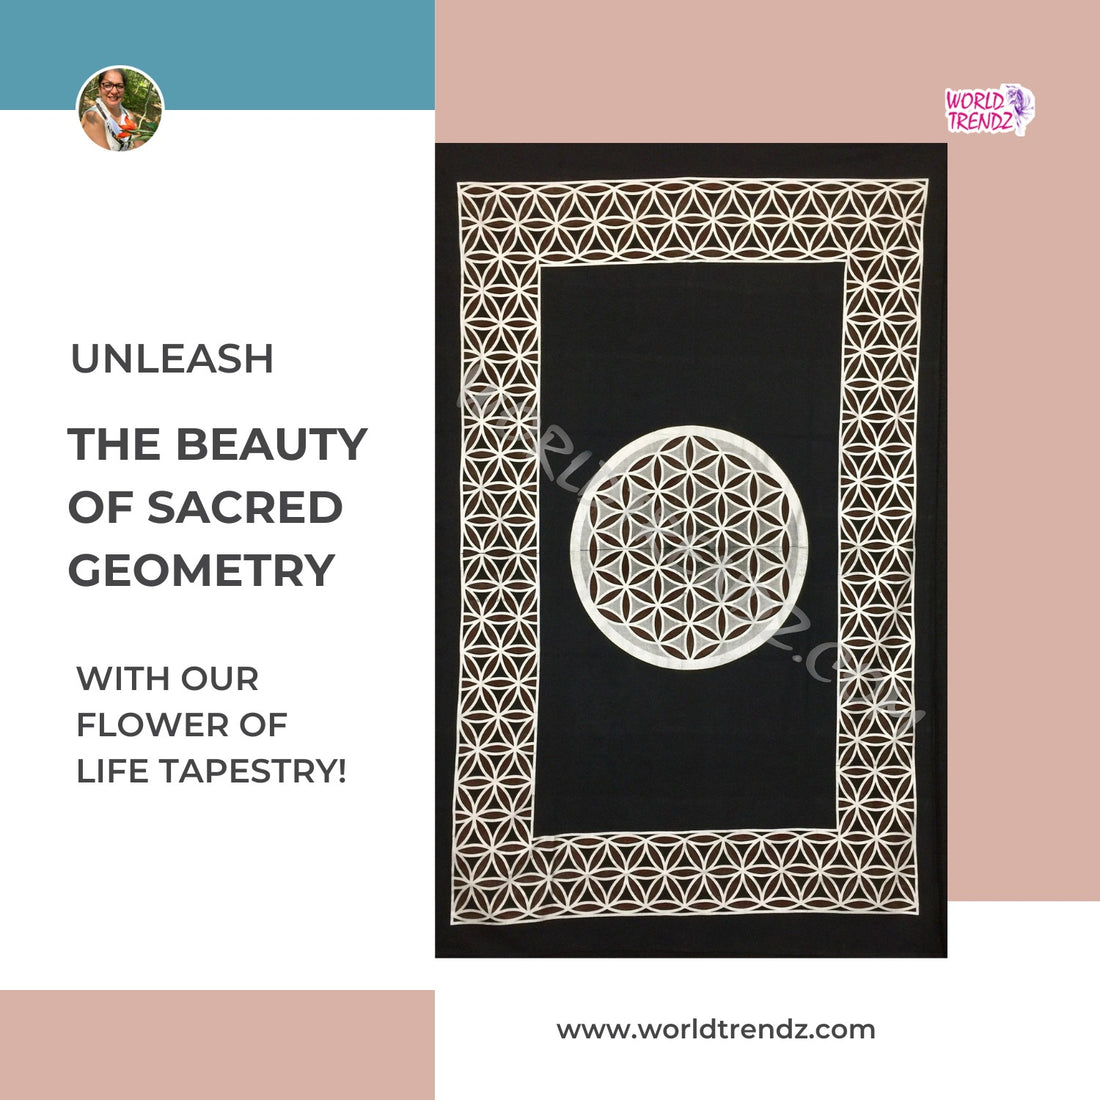 Timeless Beauty of the Flower of Life Tapestry in Black-Silver-Brown